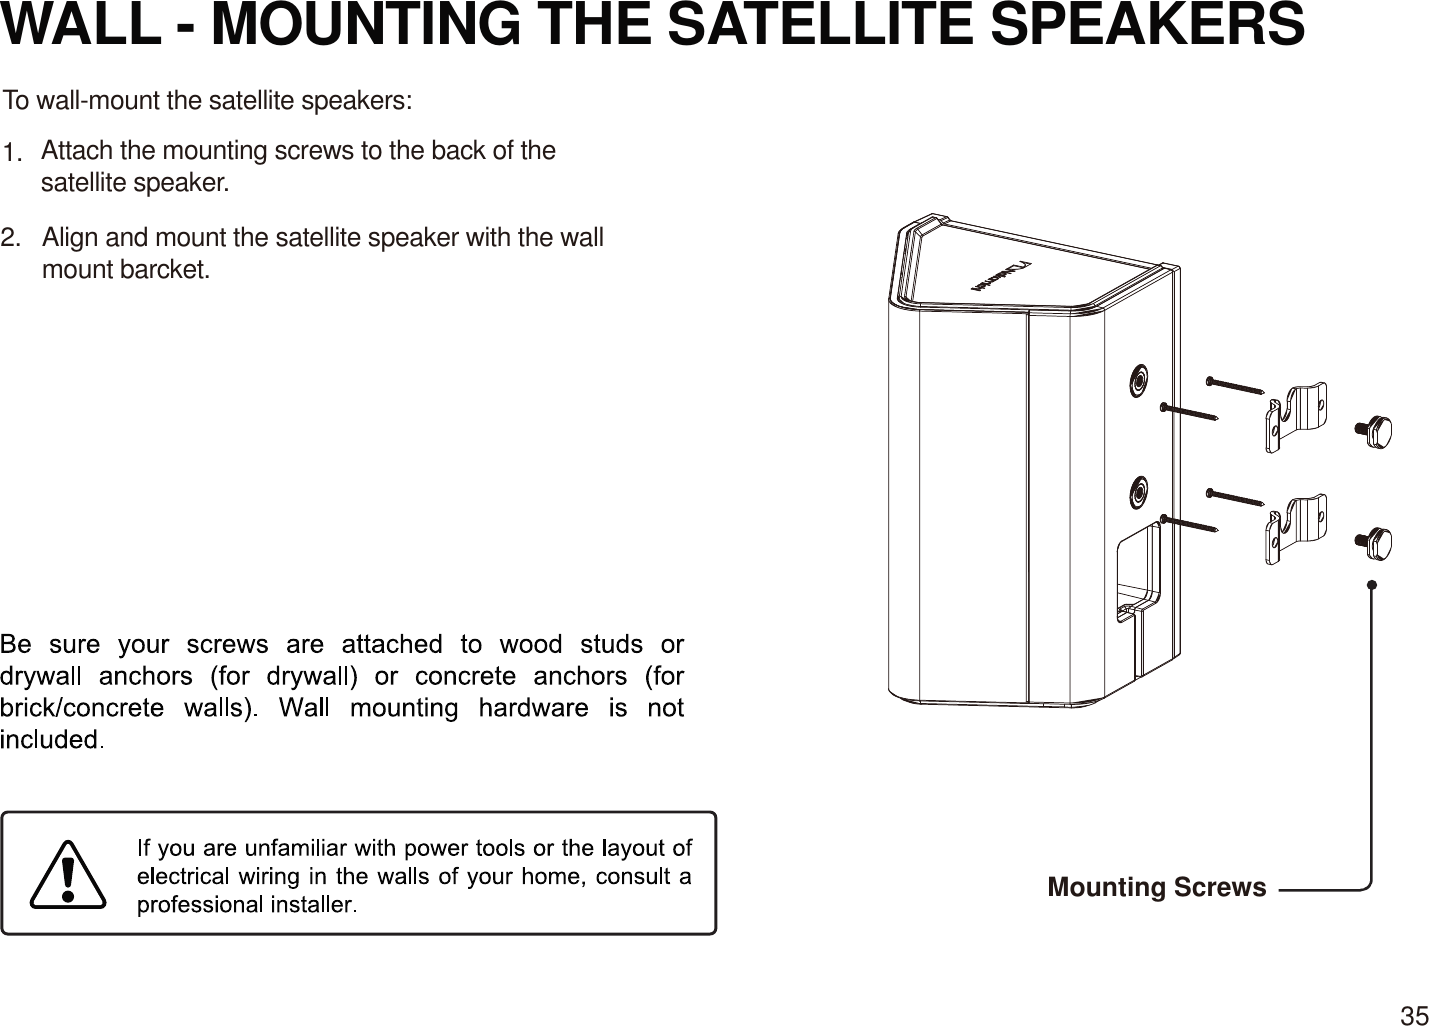 WALL - MOUNTING THE SATELLITE SPEAKERS To wall-mount the satellite speakers:Attach the mounting screws to the back of the satellite speaker.Align and mount the satellite speaker with the wallmount barcket.1.2.Mounting Screws35